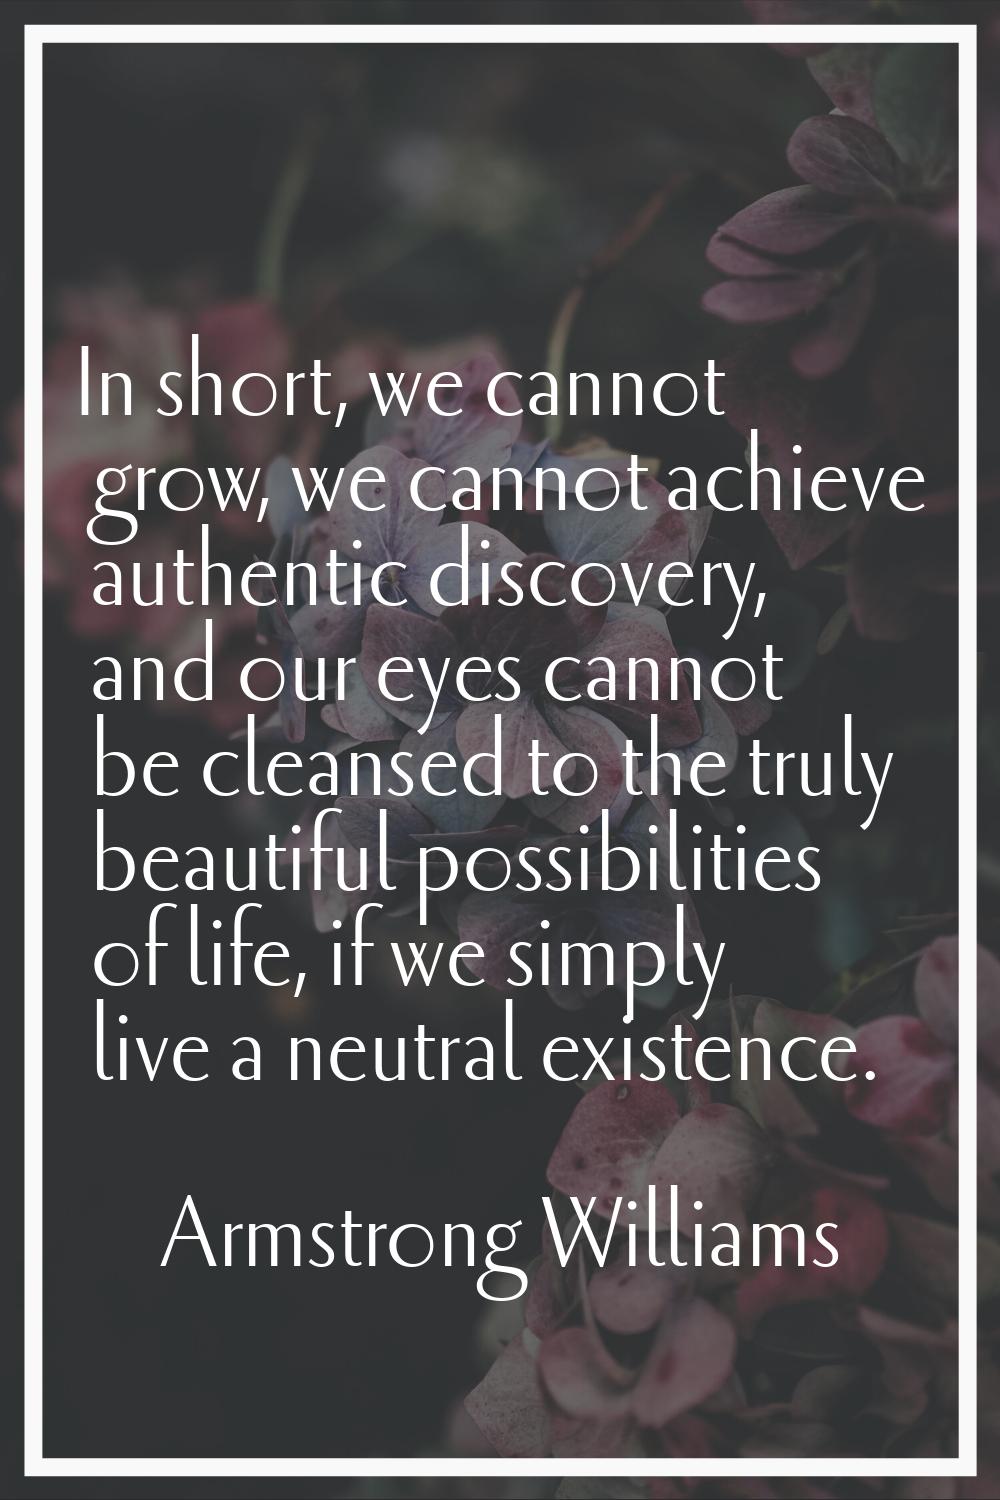 In short, we cannot grow, we cannot achieve authentic discovery, and our eyes cannot be cleansed to